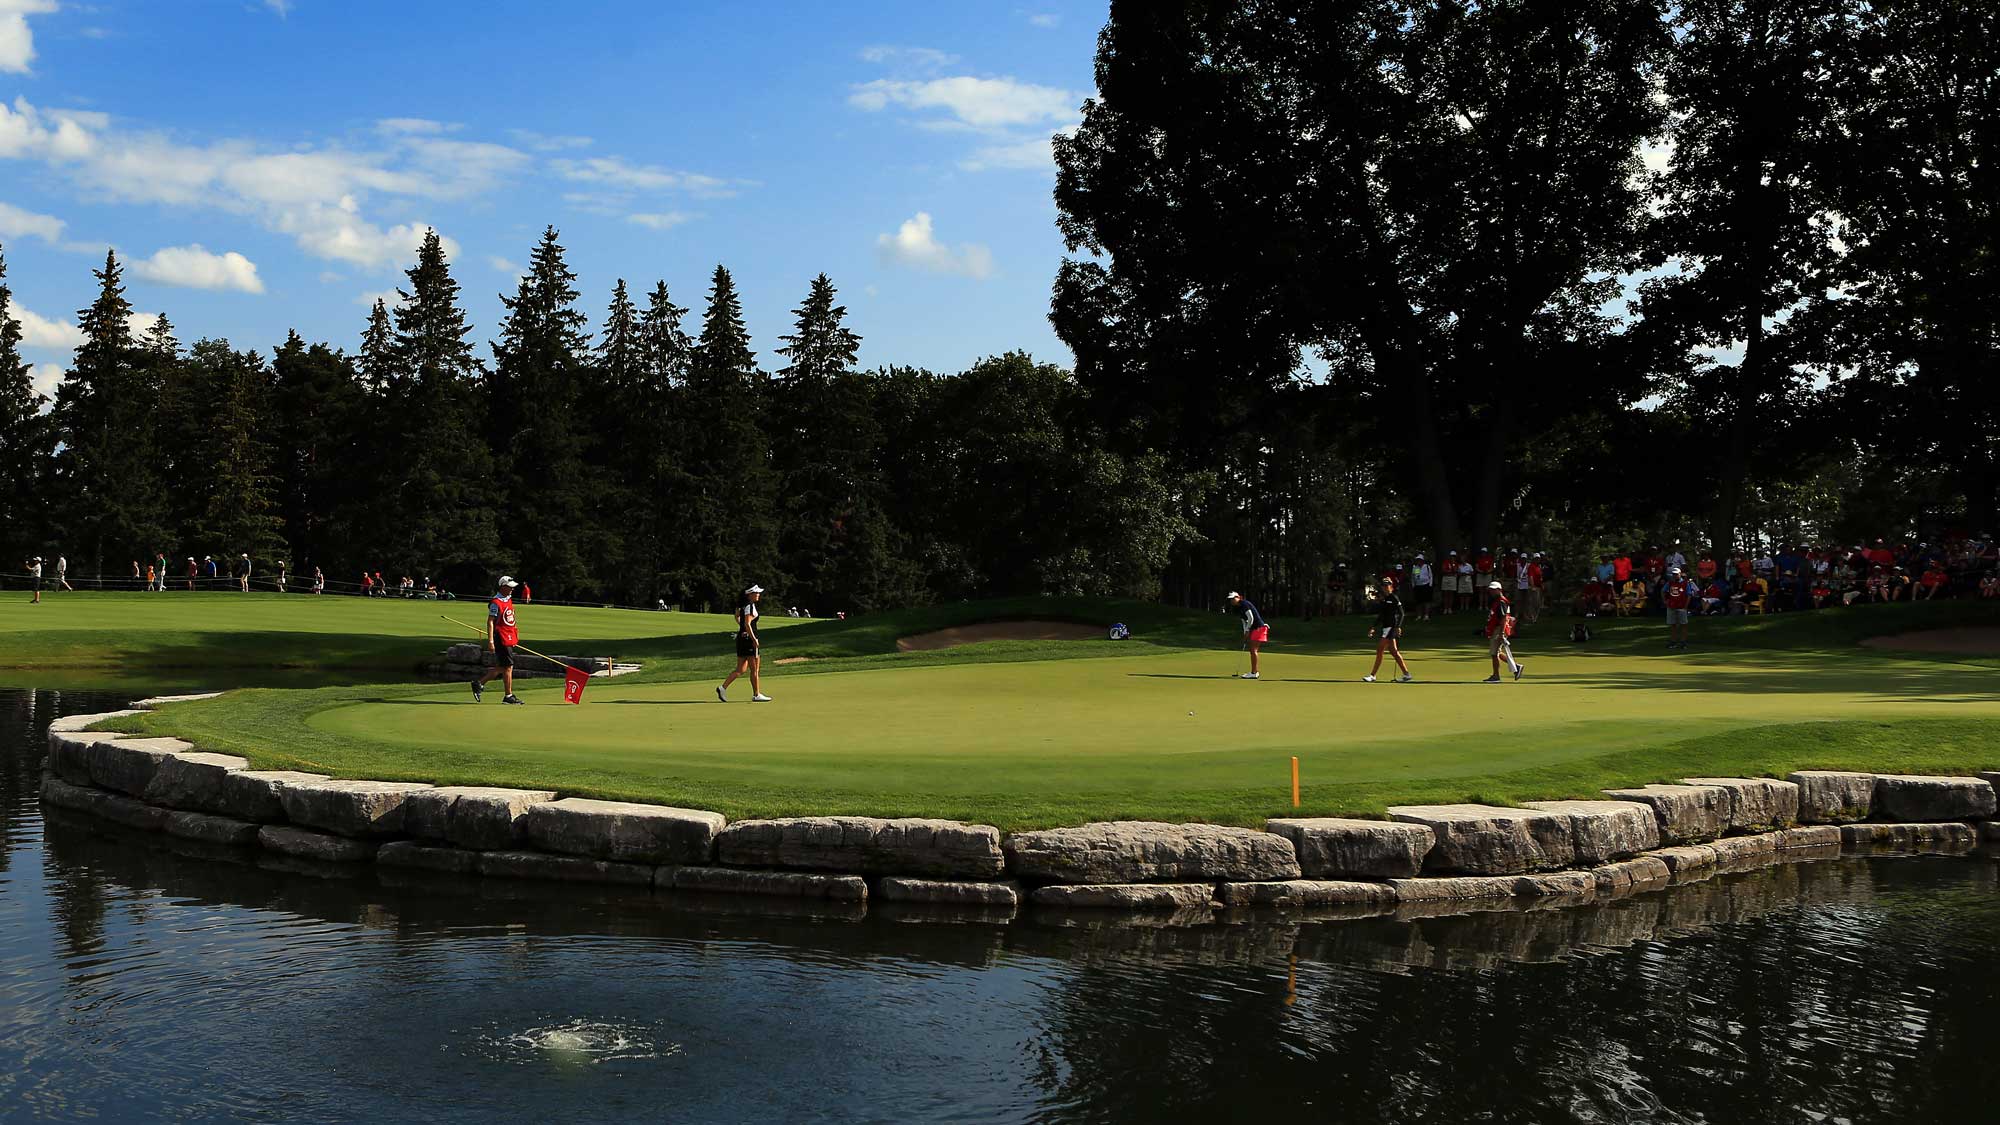 Marina Alex of the United States putts on the 13th hole during the final round of the Canadian Pacific Women's Open